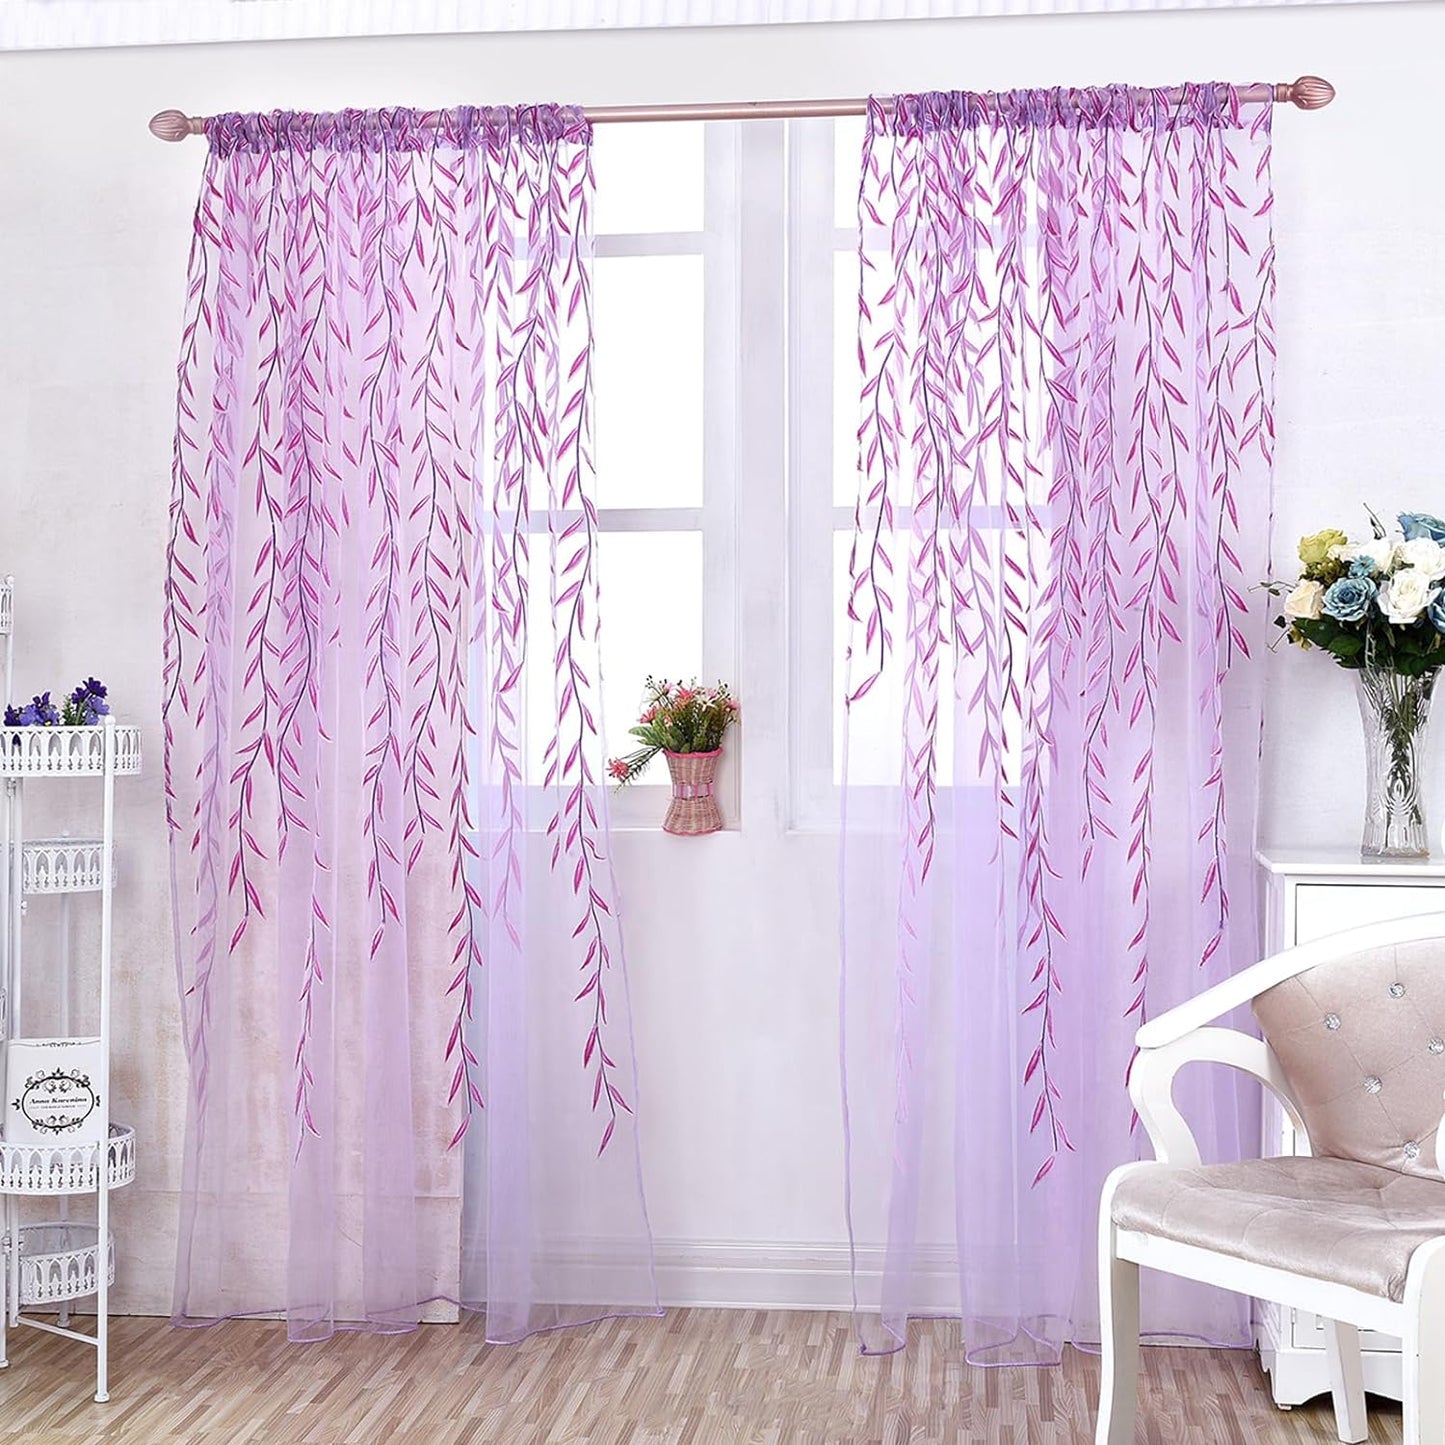 Ufurty Rely2016 Sunflower Window Curtain, 2PCS Sun Flower Floral Voile Sheer Curtain Panels Tulle Room Salix Leaf Sheer Gauze Curtain for Living Room, Bedroom, Balcony - Rod Pocket Top (100 X 200)  Rely2016 Purple Leaf 100*200Cm 